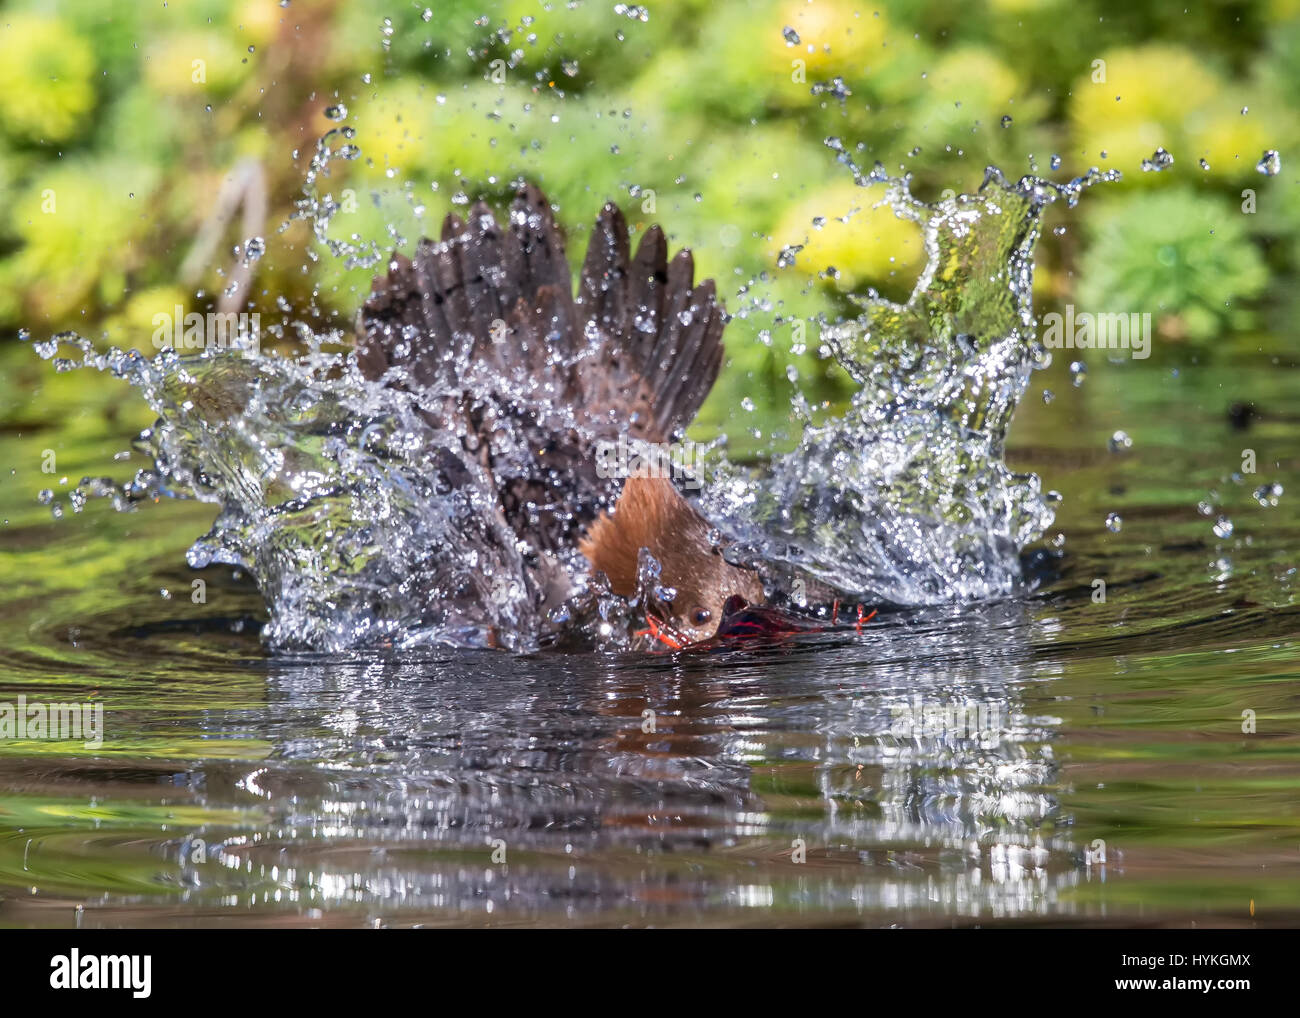 GOLDEN GATE PARK, CALIFORNIA, USA: THIS SHELL-FISH bird was captured swallowing whole crayfish in what looks like the most uncomfortable feeding-frenzy ever. The female Hooded Merganser swallowed four crayfish in a matter of minutes, first chasing the heavily armoured yet hapless invertebrates across the lake they were peacefully living in, then scooping in them up and swallowing them whole. Astonished Creative Labs employee Thinh Bui (58) from Fremont California, captured this extraordinary scene while visiting San Francisco’s South Lake in the Golden Gate State Park. Stock Photo